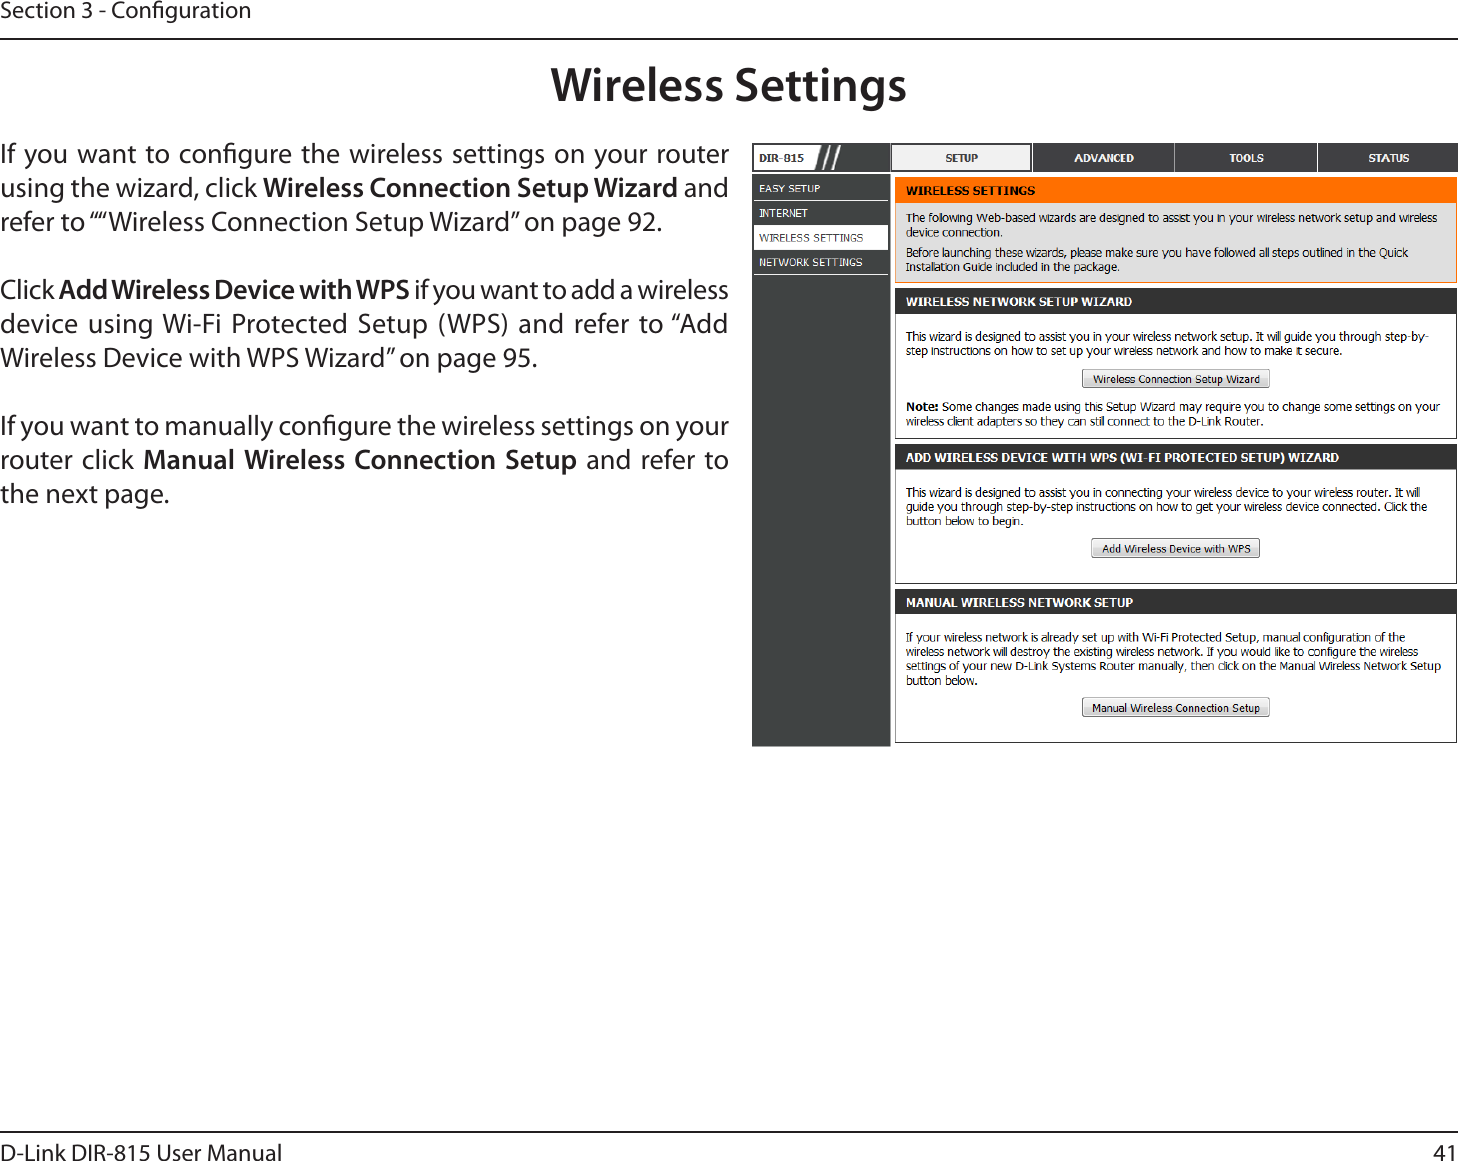 41D-Link DIR-815 User ManualSection 3 - CongurationWireless SettingsIf you want to congure the wireless settings on your router using the wizard, click Wireless Connection Setup Wizard and refer to ““Wireless Connection Setup Wizard” on page 92.Click Add Wireless Device with WPS if you want to add a wireless device using Wi-Fi Protected Setup (WPS) and refer to “Add Wireless Device with WPS Wizard” on page 95.If you want to manually congure the wireless settings on your router click Manual Wireless Connection Setup and refer to the next page.